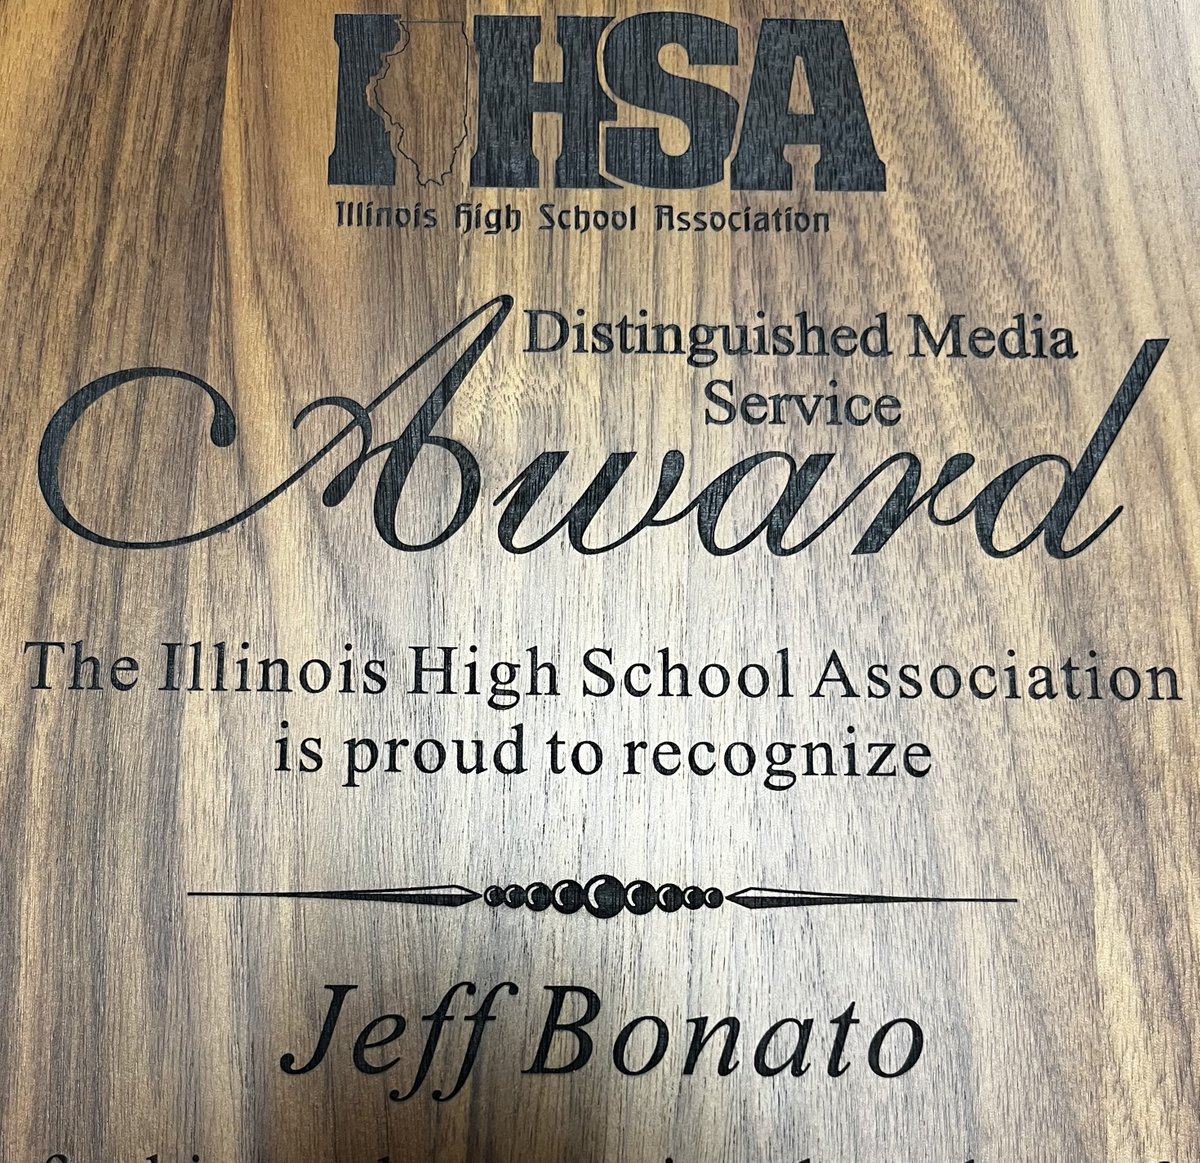 🏅📰 Long-time Lake County sportswriter Jeff Bonato will be honored with the #IHSA Distinguished Media Service Award on Friday, December 2 at Waukegan HS. 🏀The ceremony will occur prior to the varsity basketball game at approx. 6:30 PM. 🔗More Info▶️ihsa.org/IHSA-State/IHS…